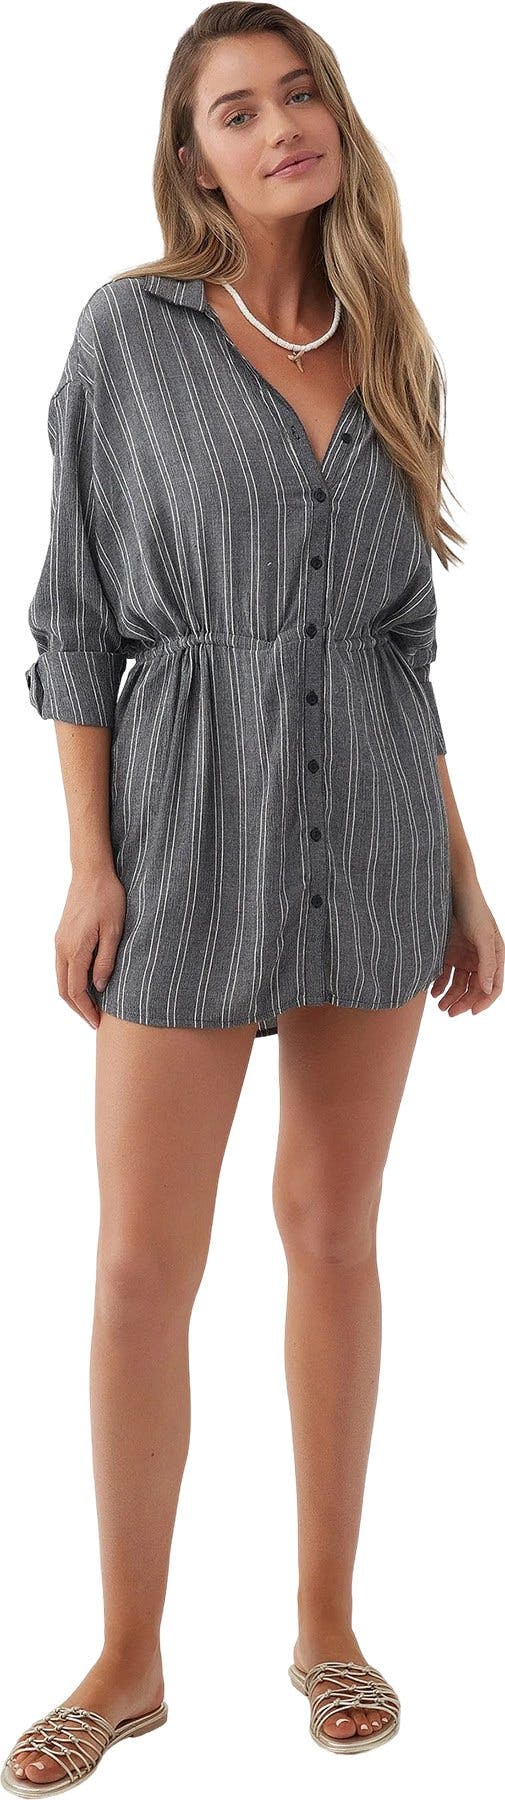 Product image for Cami Stripe Cover-Up Dress - Women's